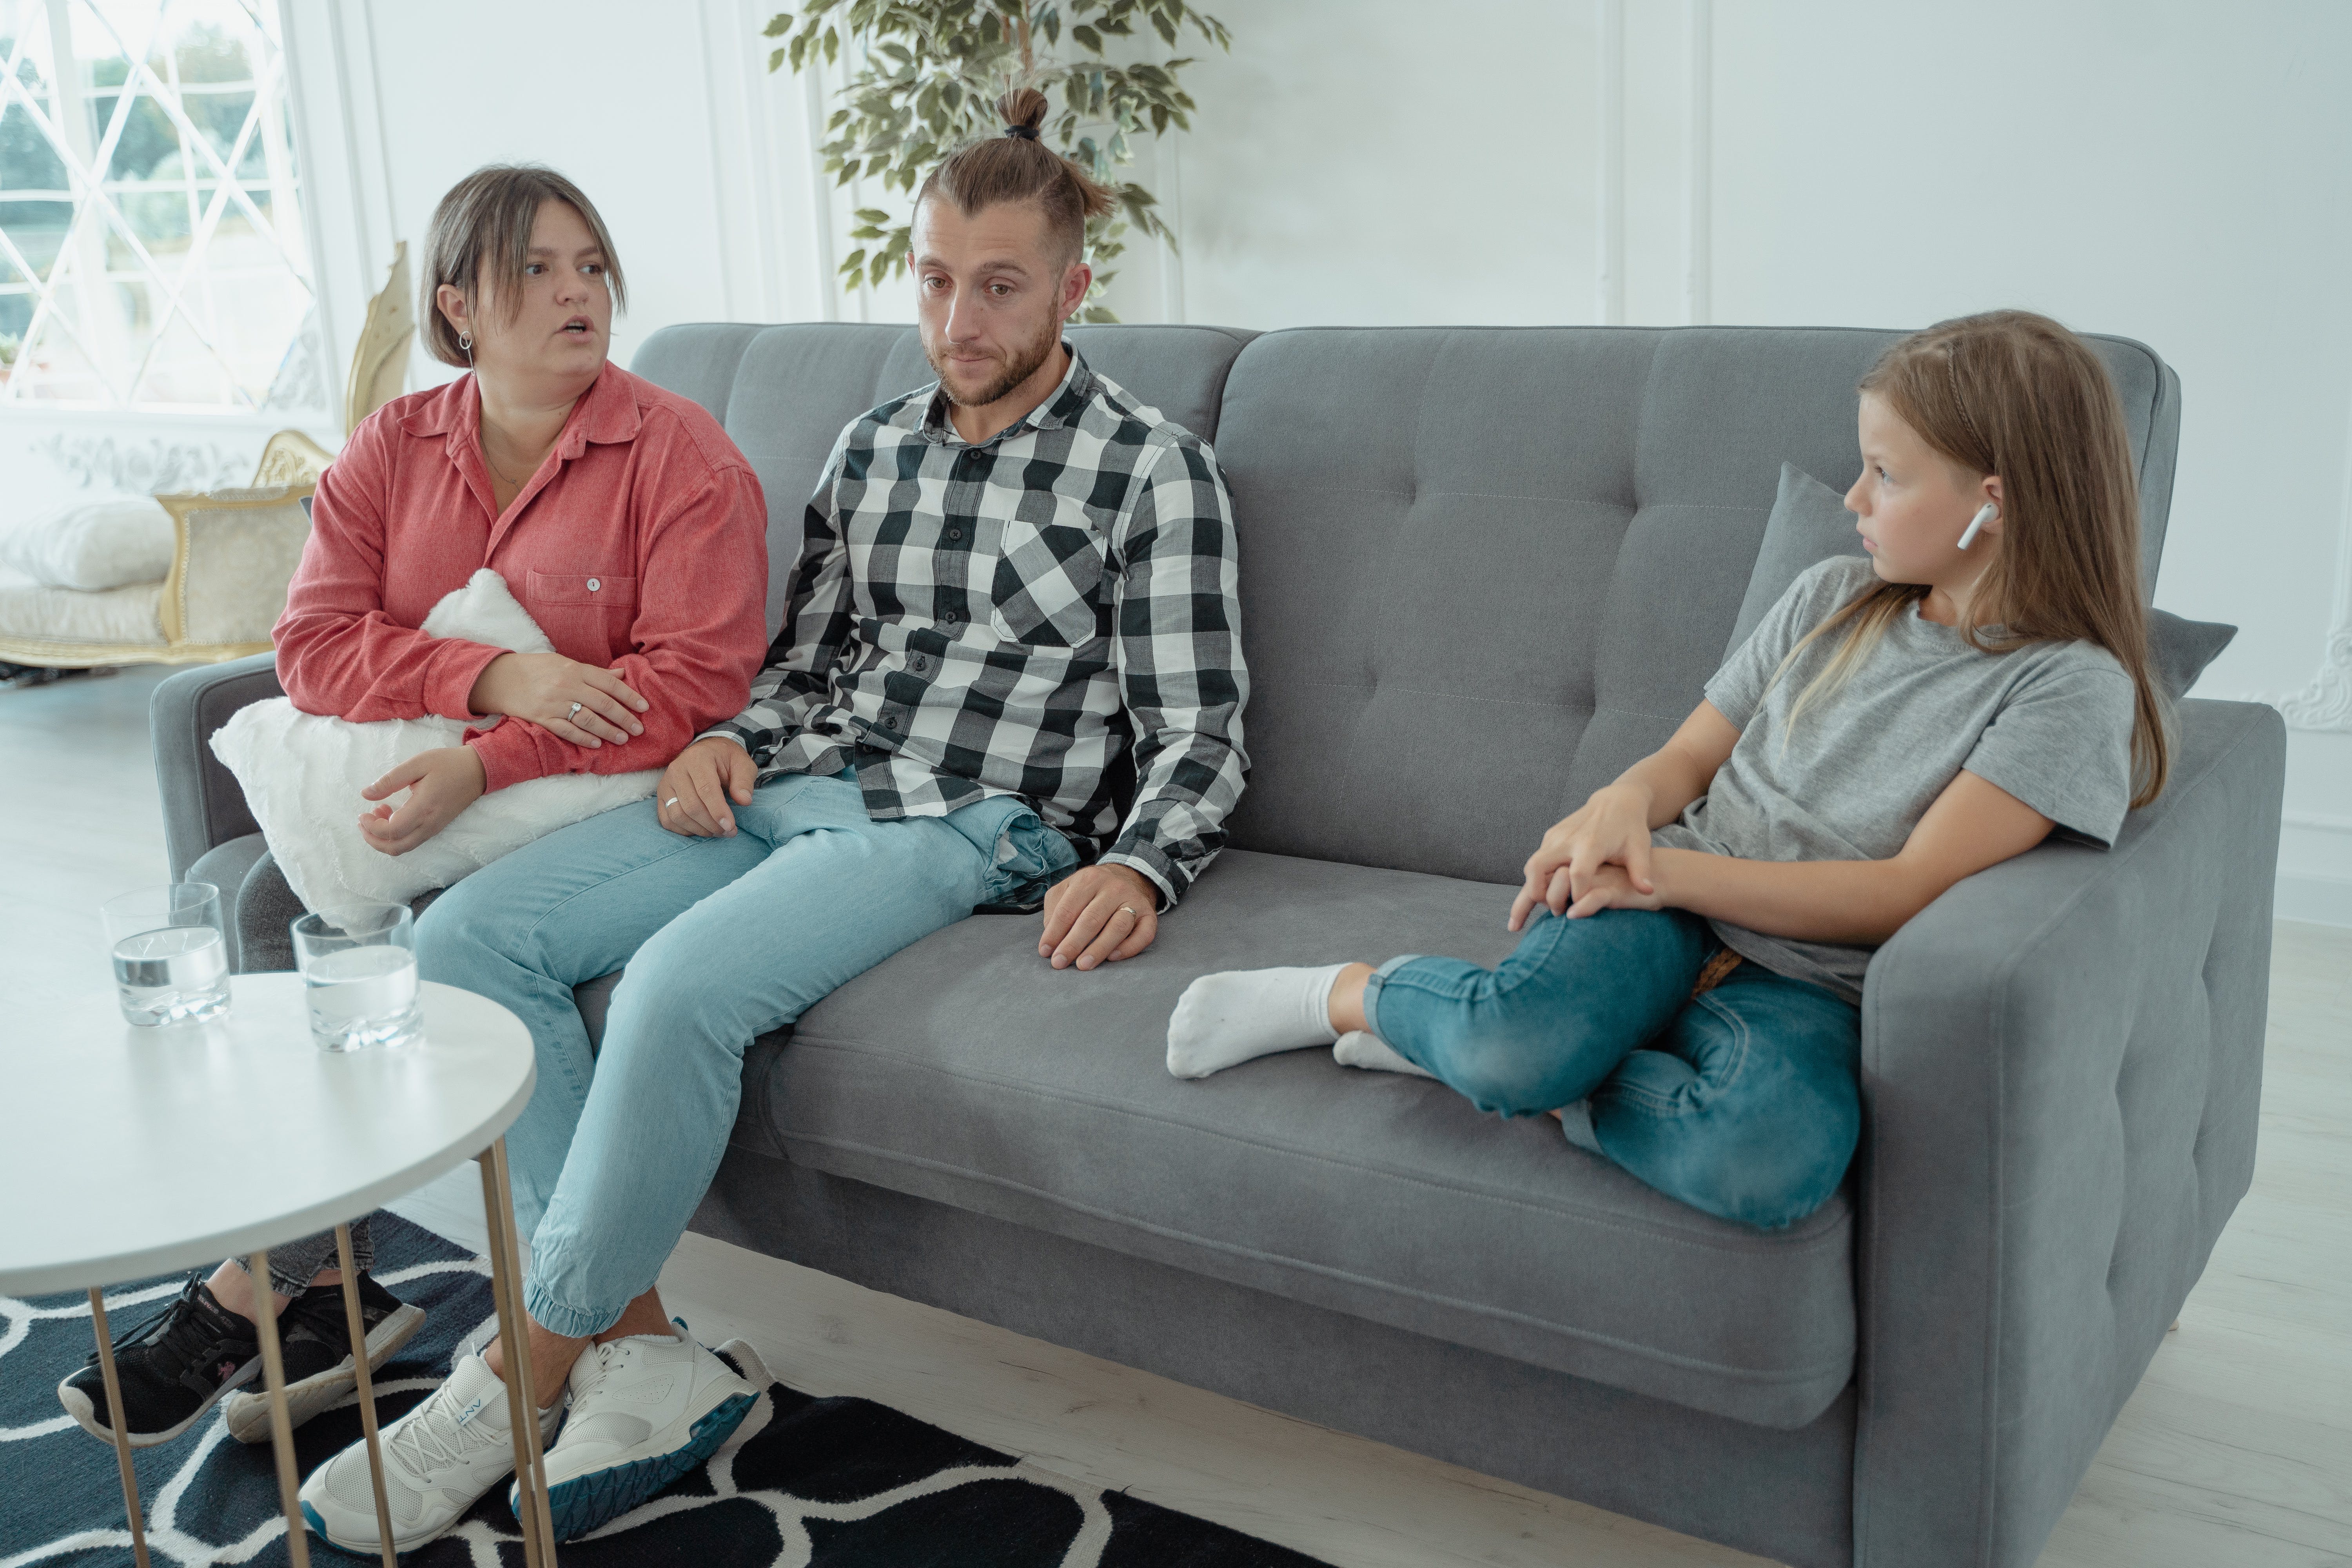 A family sitting on a couch | Source: Pexels